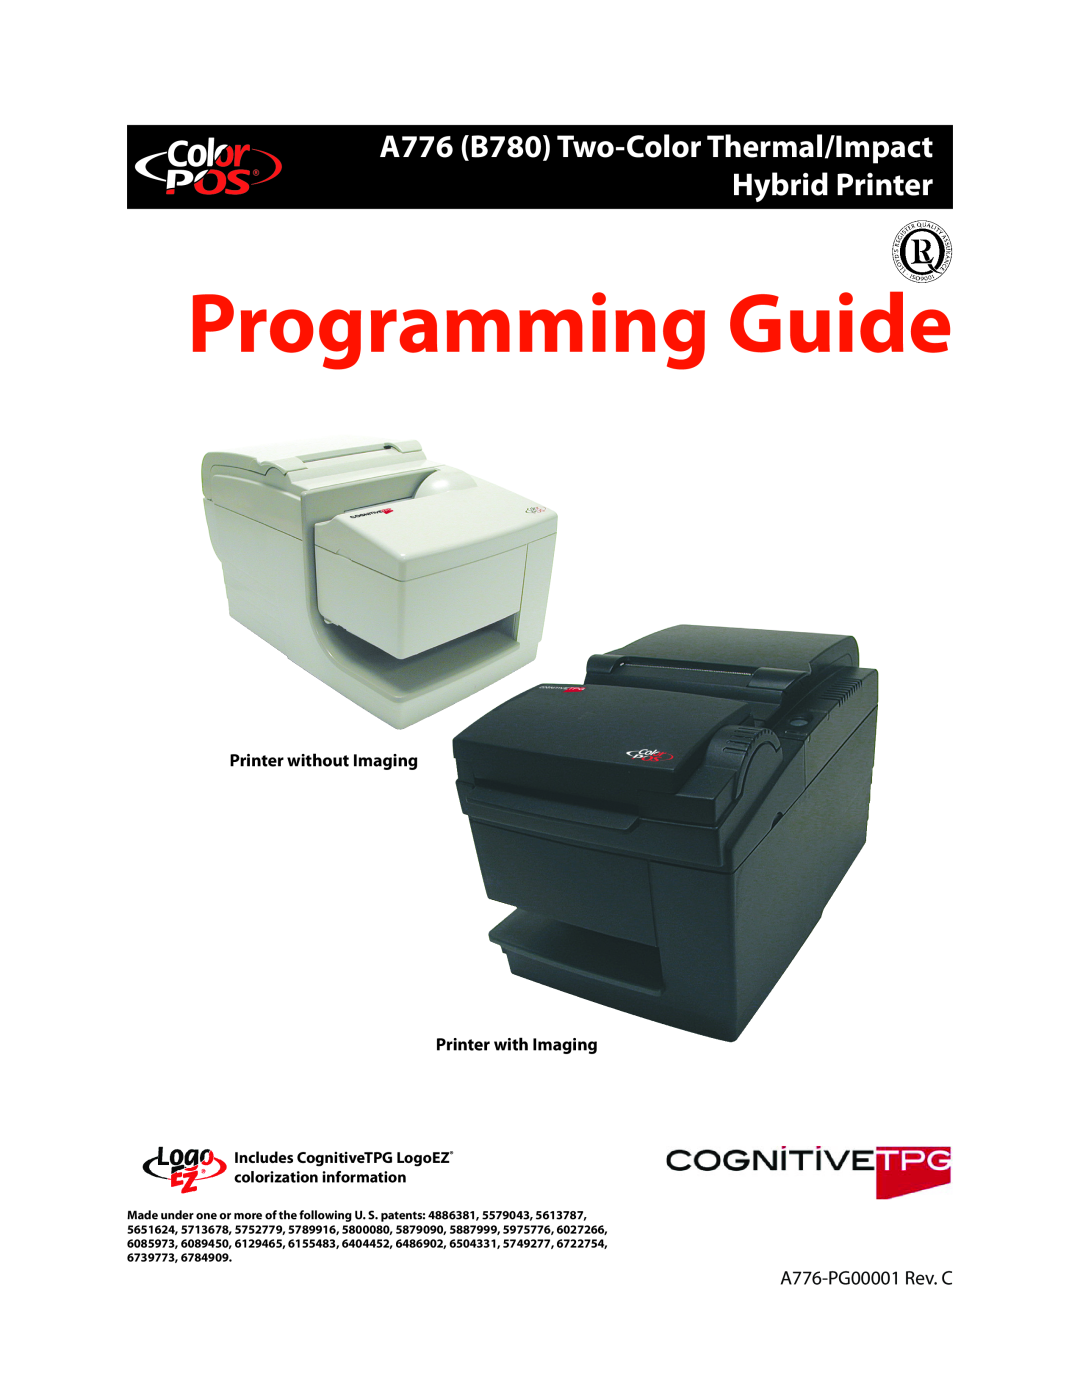 Cognitive Solutions A776 setup guide Setup Guide, Two-Color Hybrid Thermal/Impact Printer, Unpack the printer, quality 